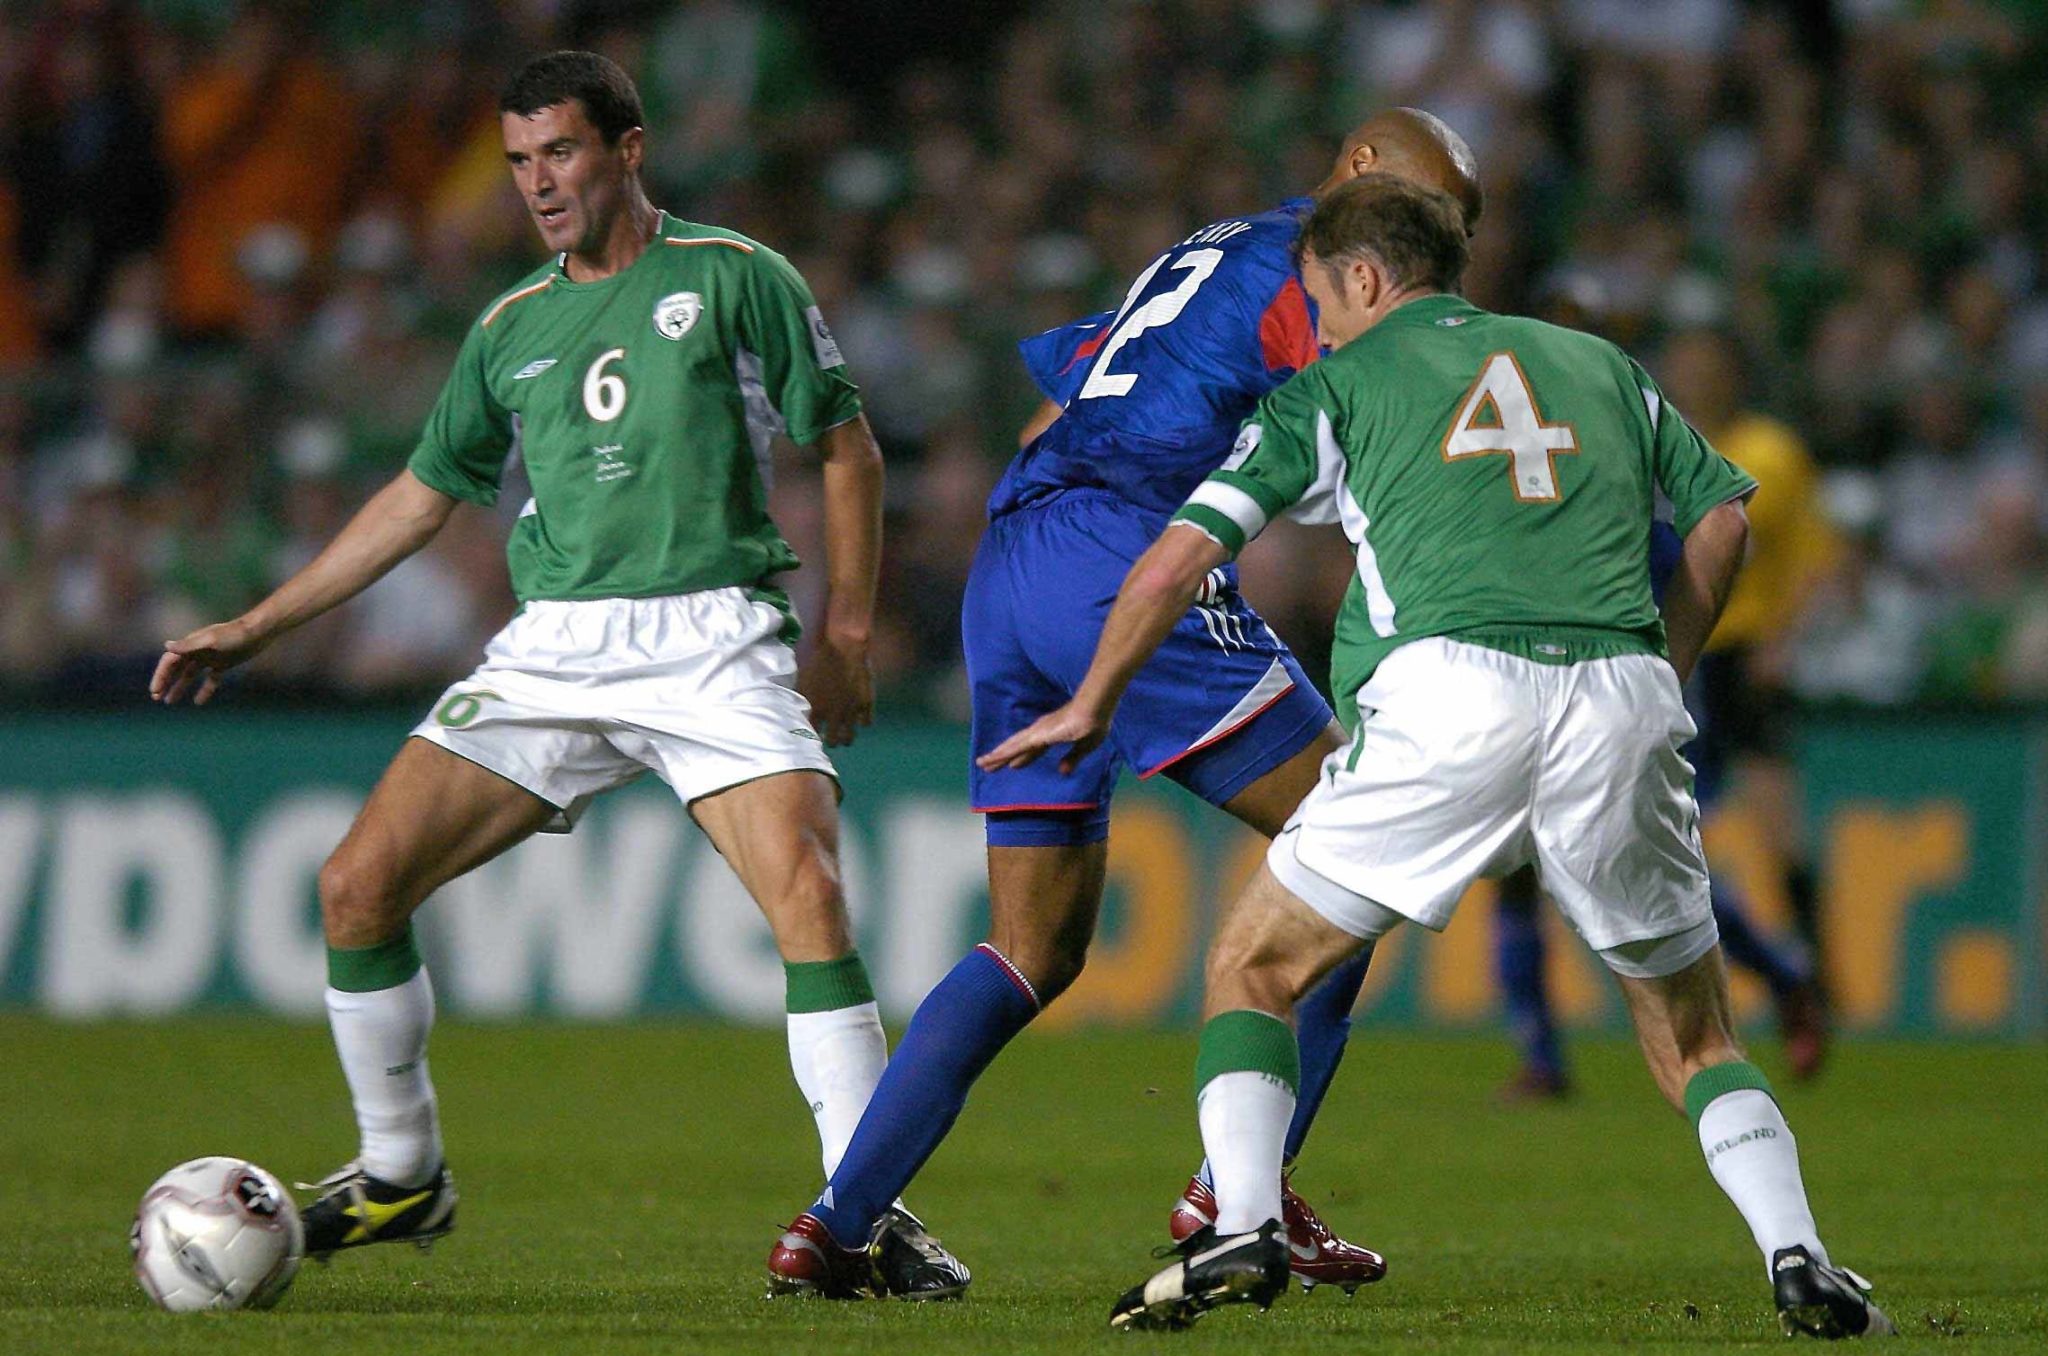 Roy Keane's style didn't get more out of me - it could be intimidating' |  OTB Sports